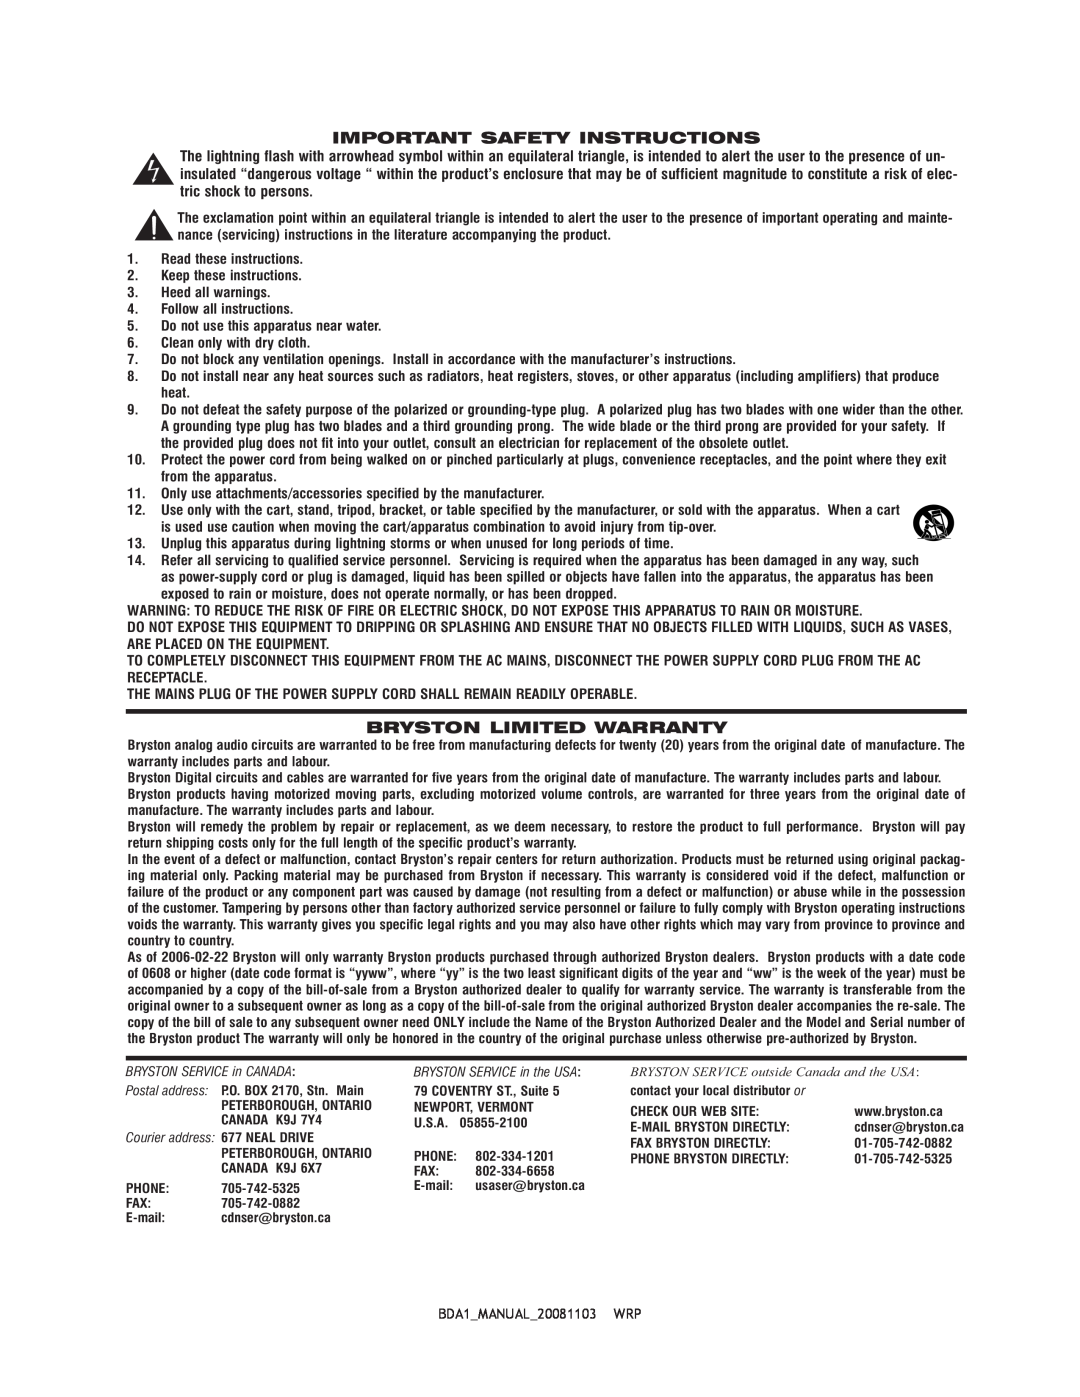 Bryston BDA-1 owner manual Important Safety Instructions, Bryston Limited Warranty 